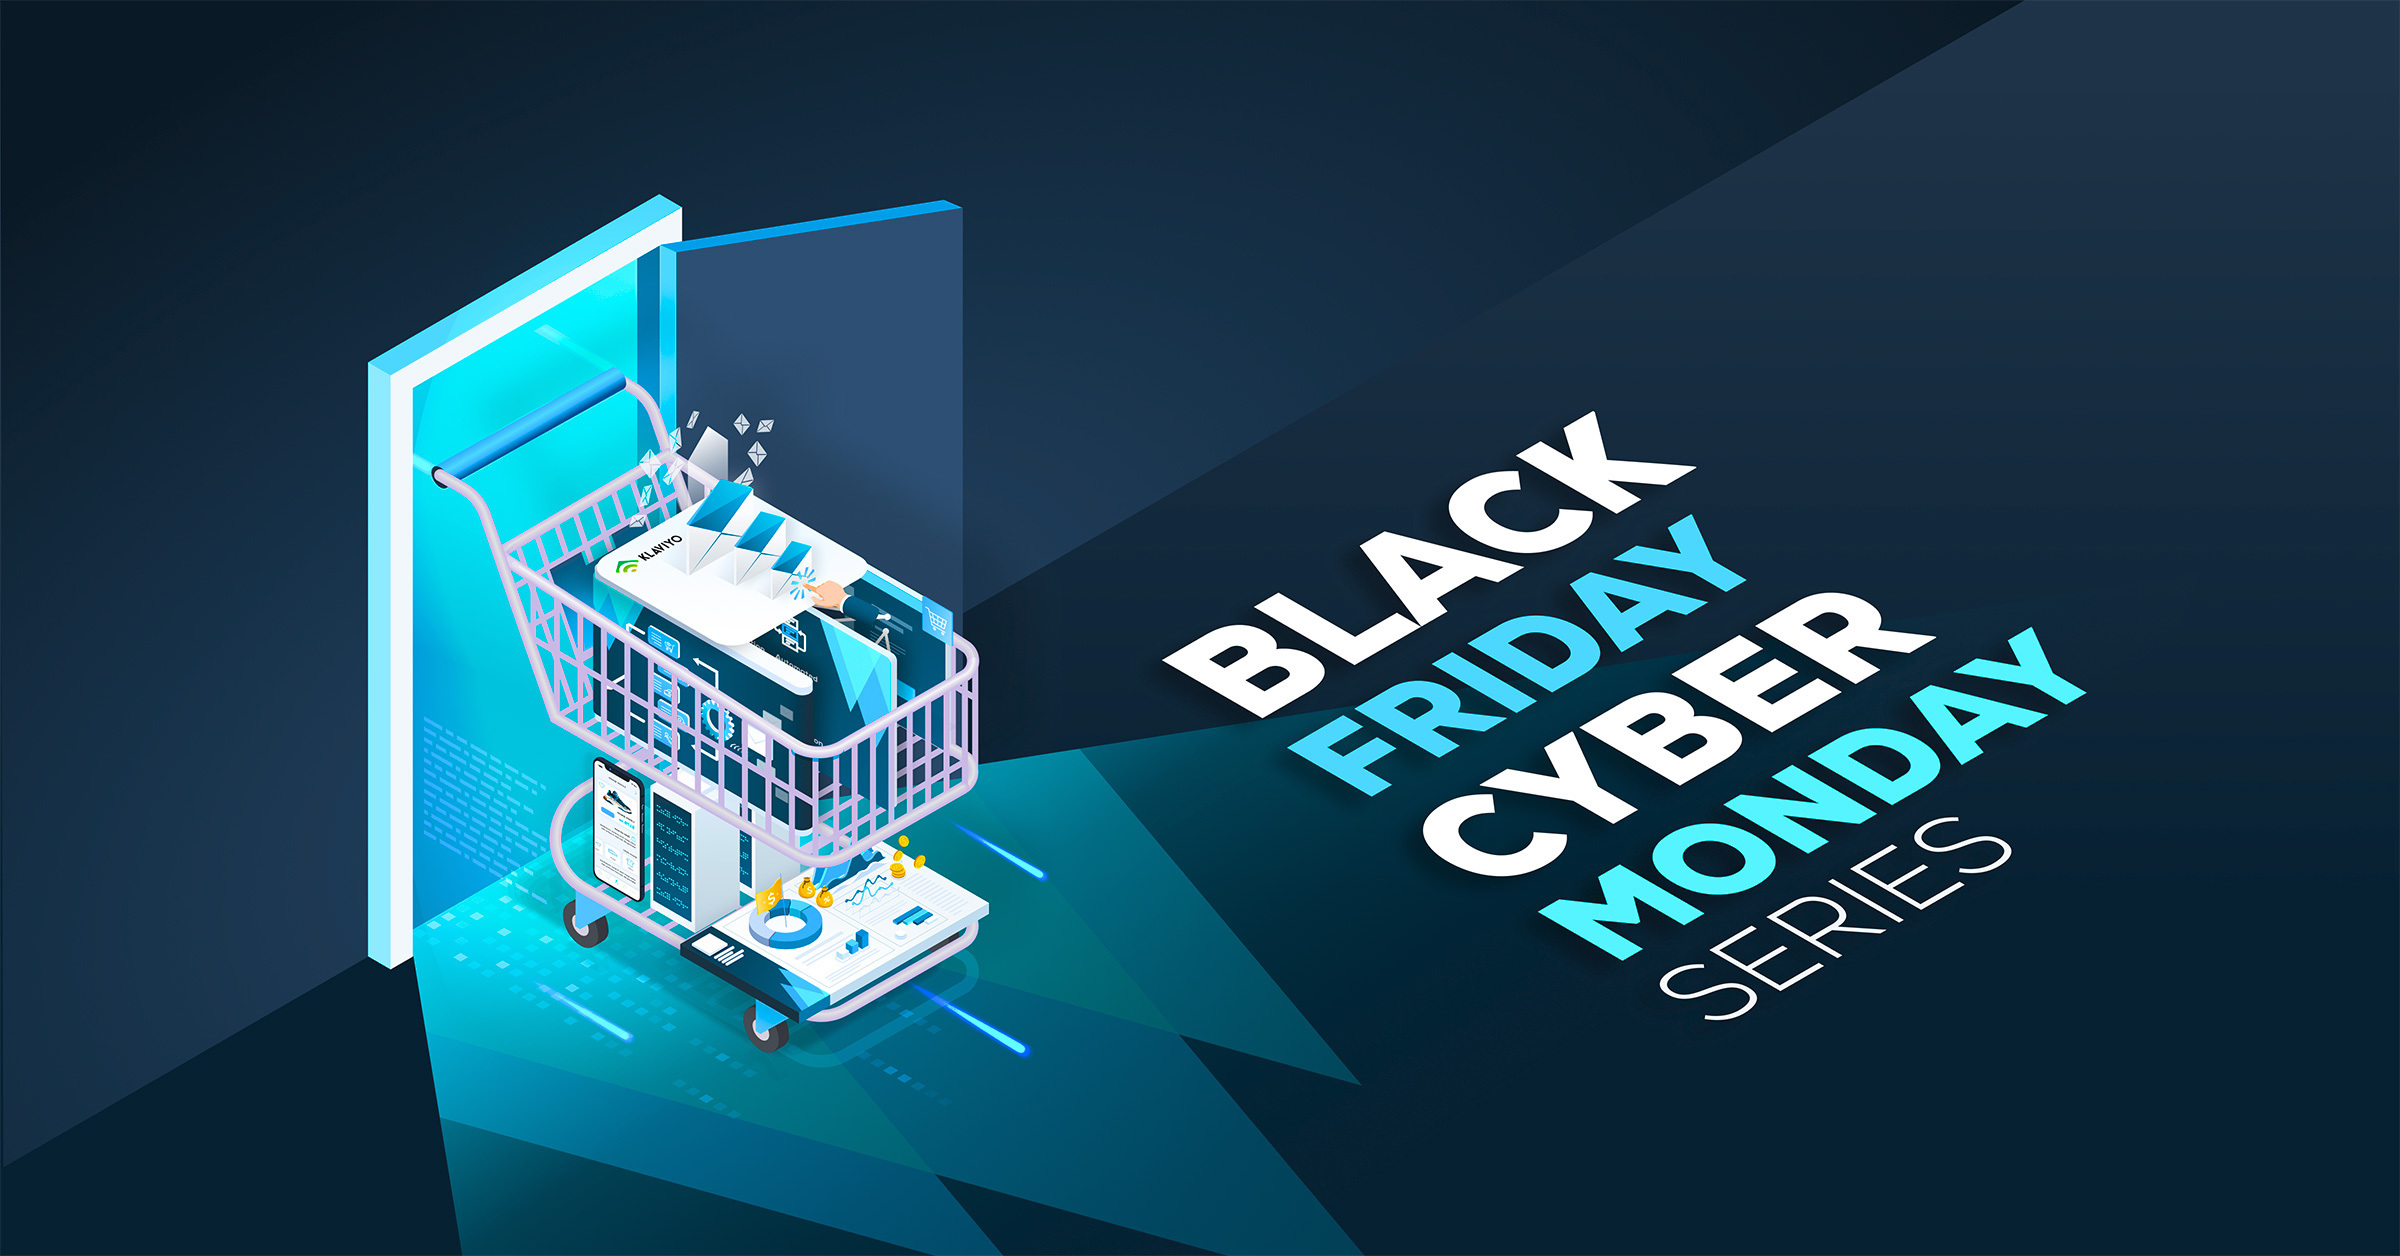 Black Friday Cyber Monday header image with shopping cart